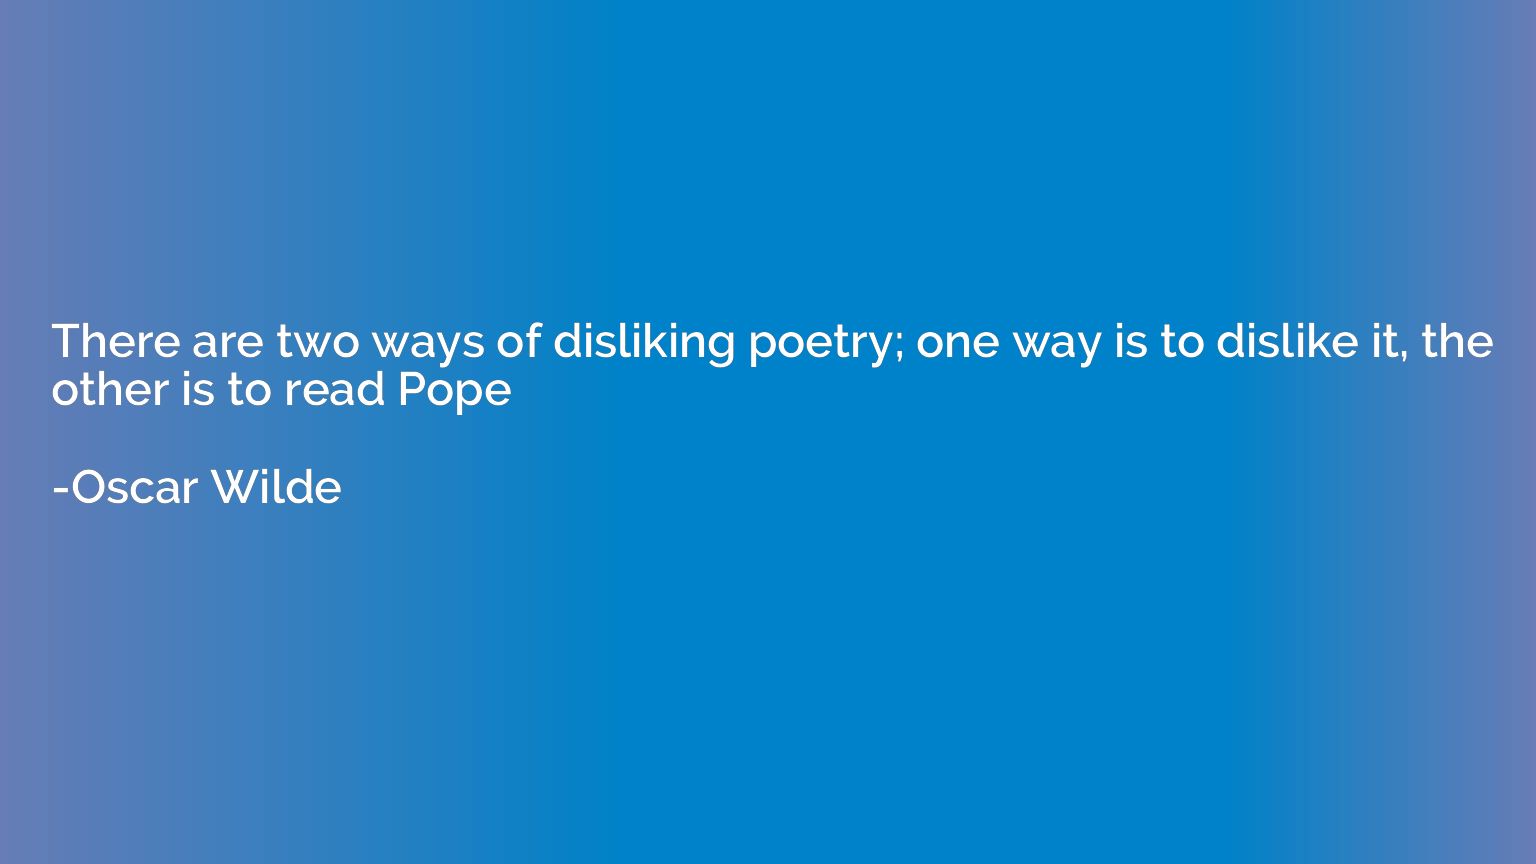 There are two ways of disliking poetry; one way is to dislik